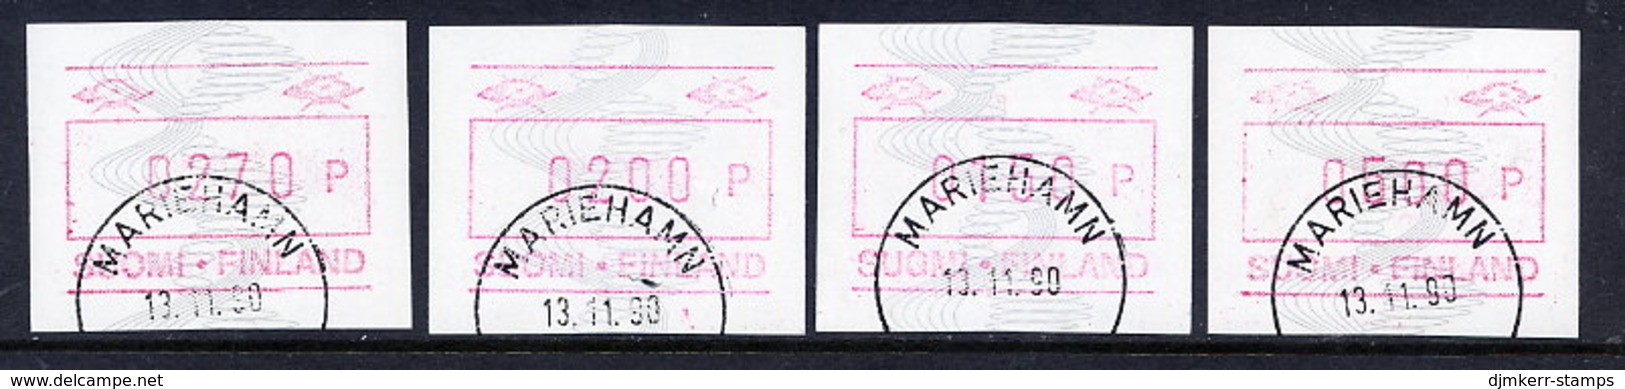 FINLAND 1990 Definitive Without ATM Number , 4 Different Values Used.  Michel 7 - Vignette [ATM]